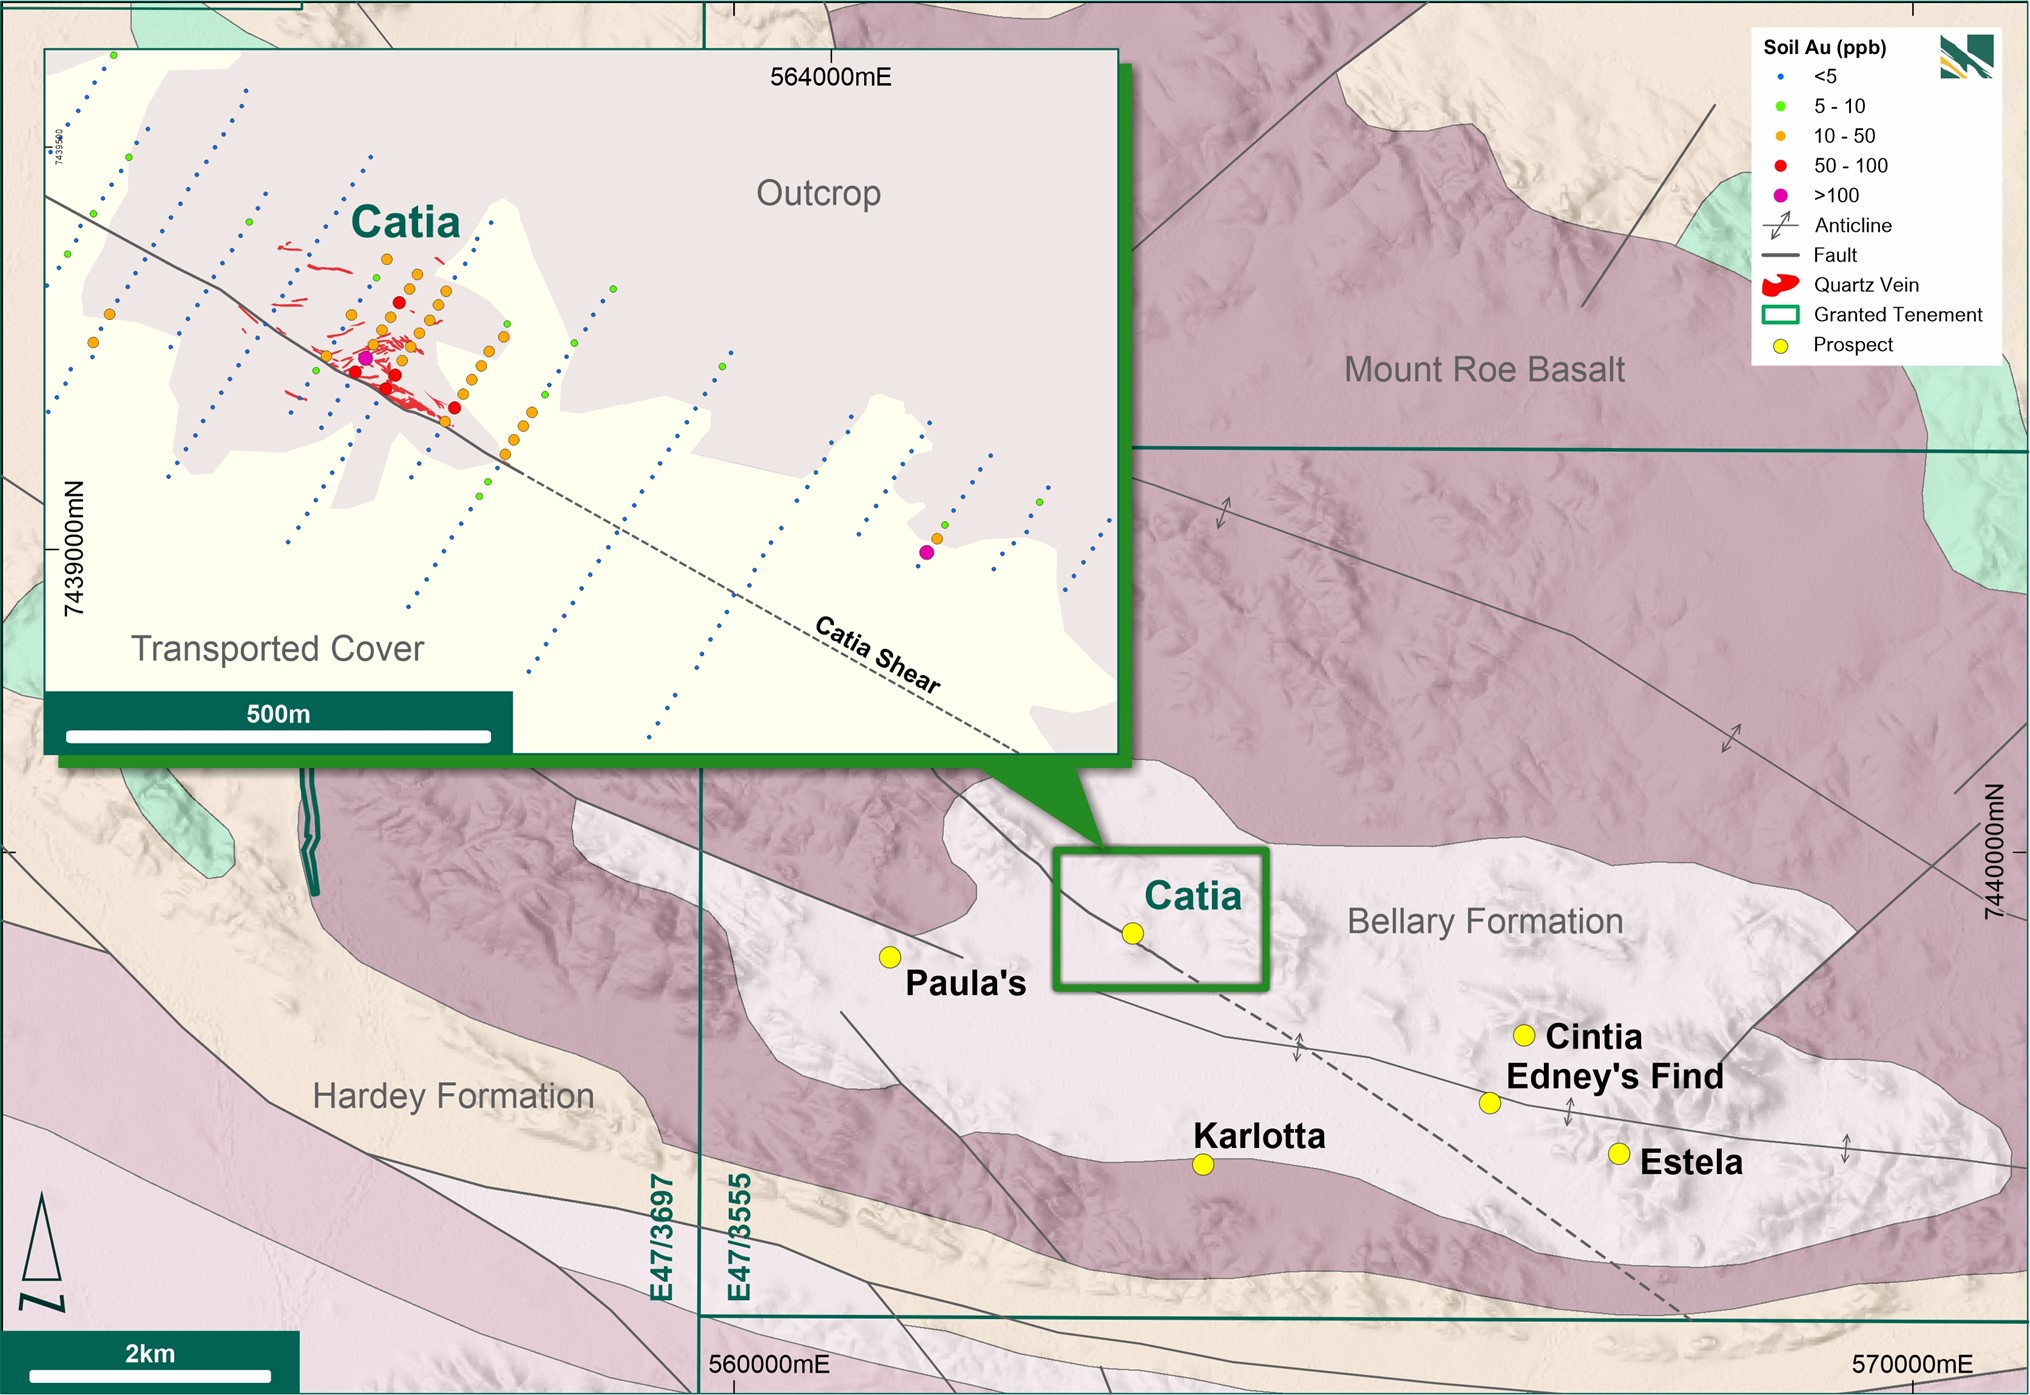 The Bellary Dome Project showing gold prospects and the Catia Shear